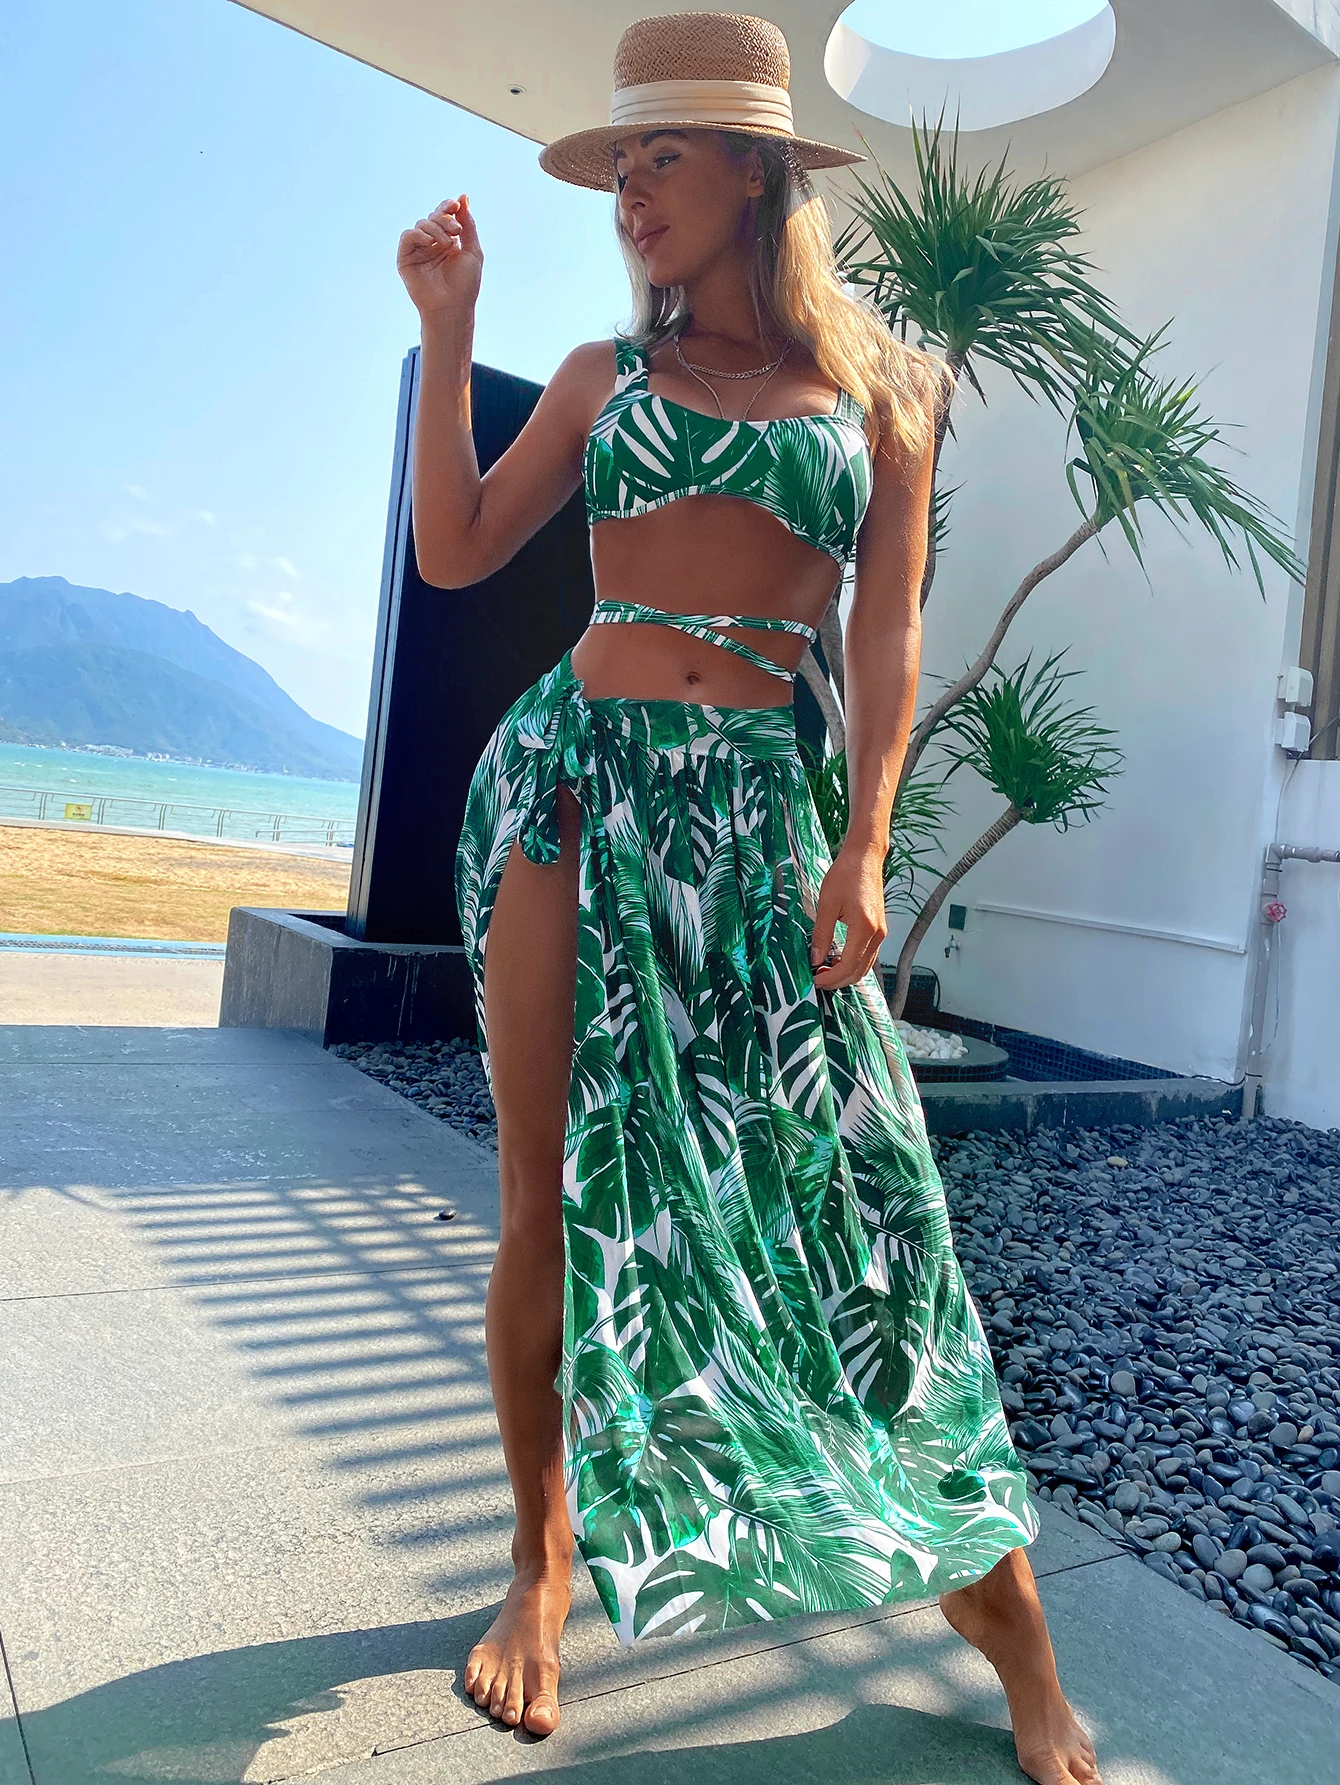 

swim CyxWzy Bikinis for Women 2022 2piece Swimsuit Hot Style Look be Slimming Green Sexy The New Summer Sunscreen Printed Dress